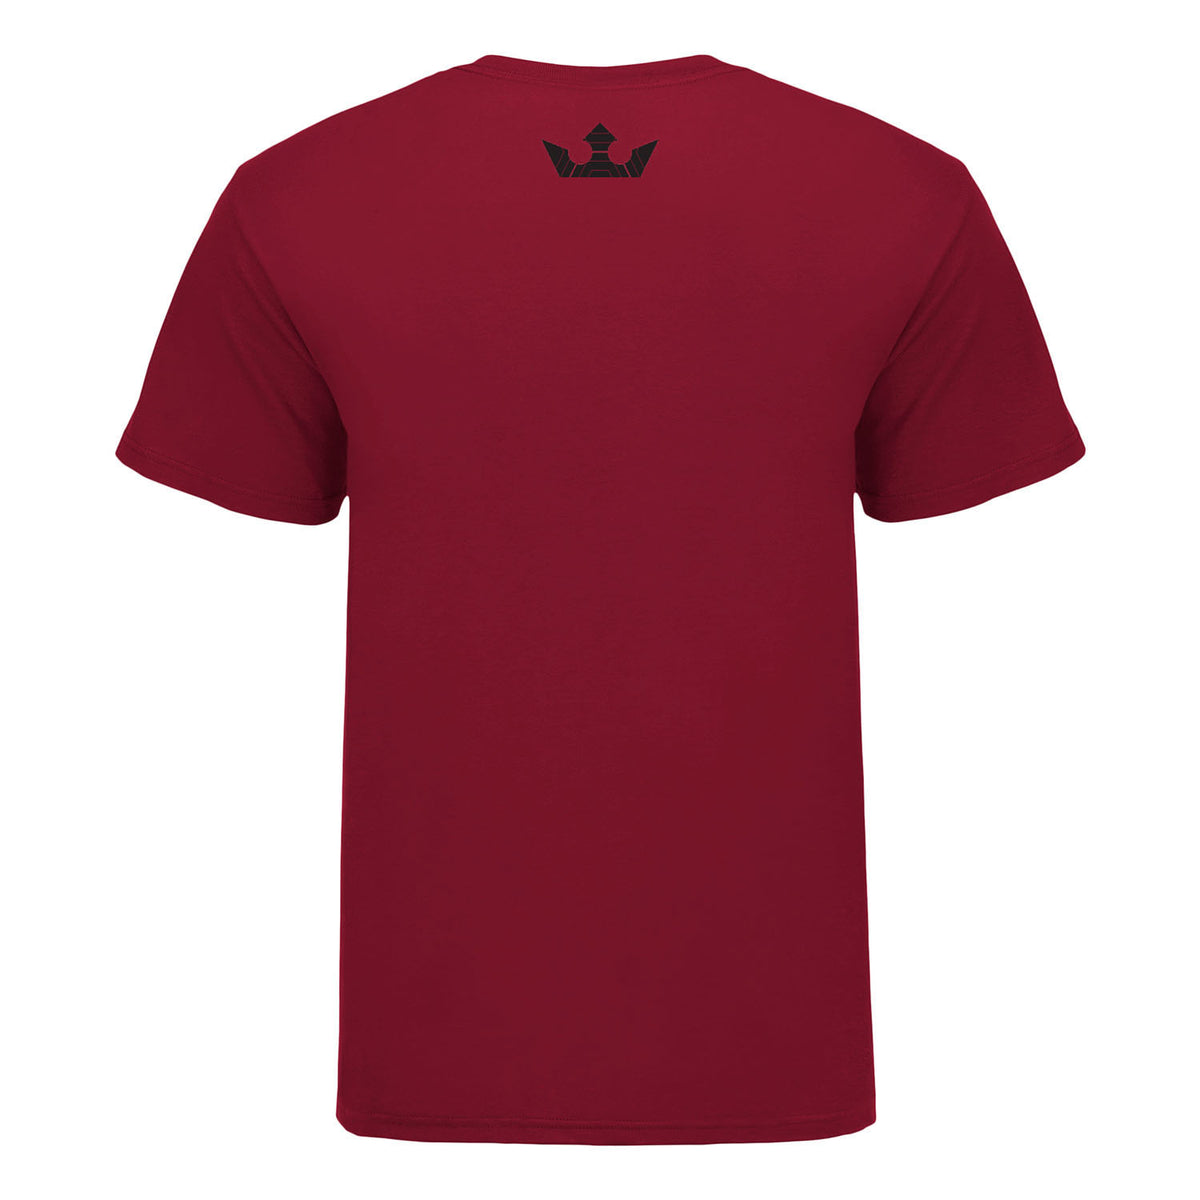 PFL Alternate Logo T-Shirt in Canvas Red - Back View